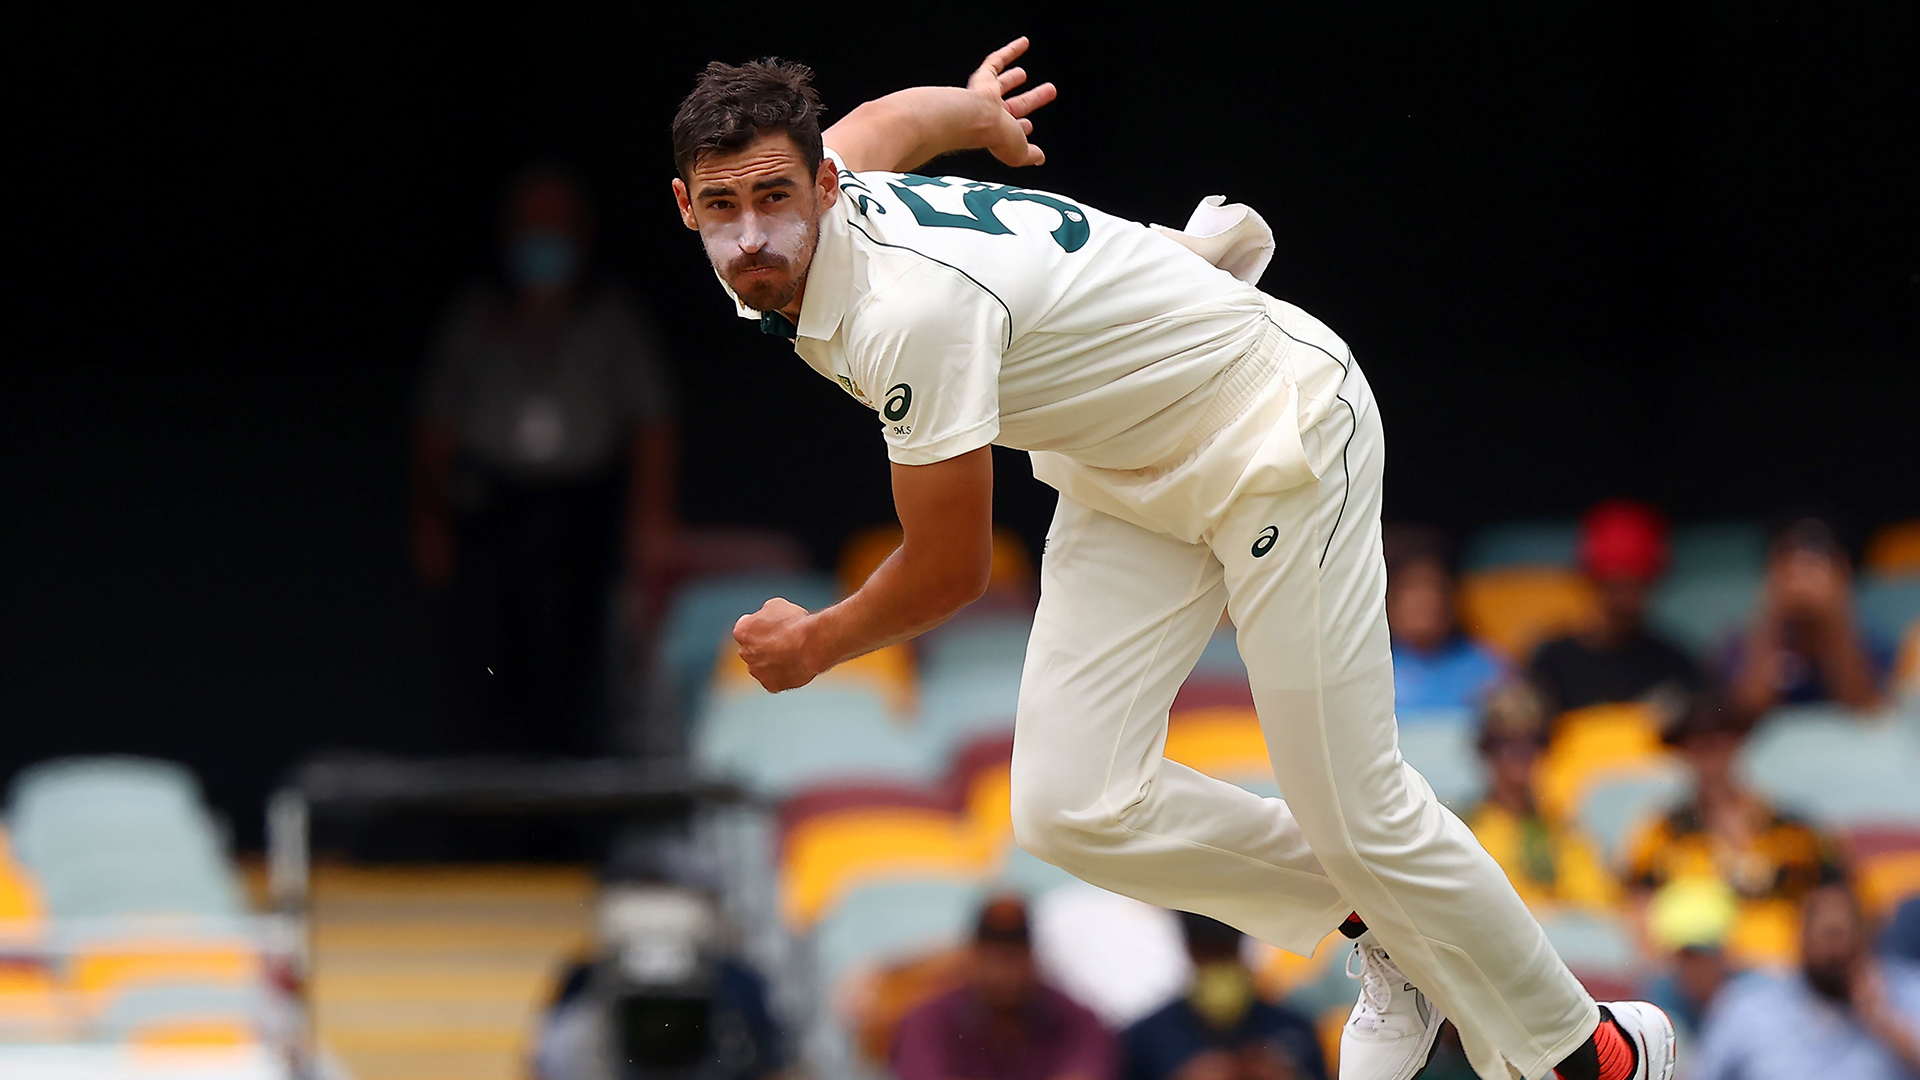 Watch | Mitchell Starc's blazing yorker to dismiss Fawad Alam for a golden duck